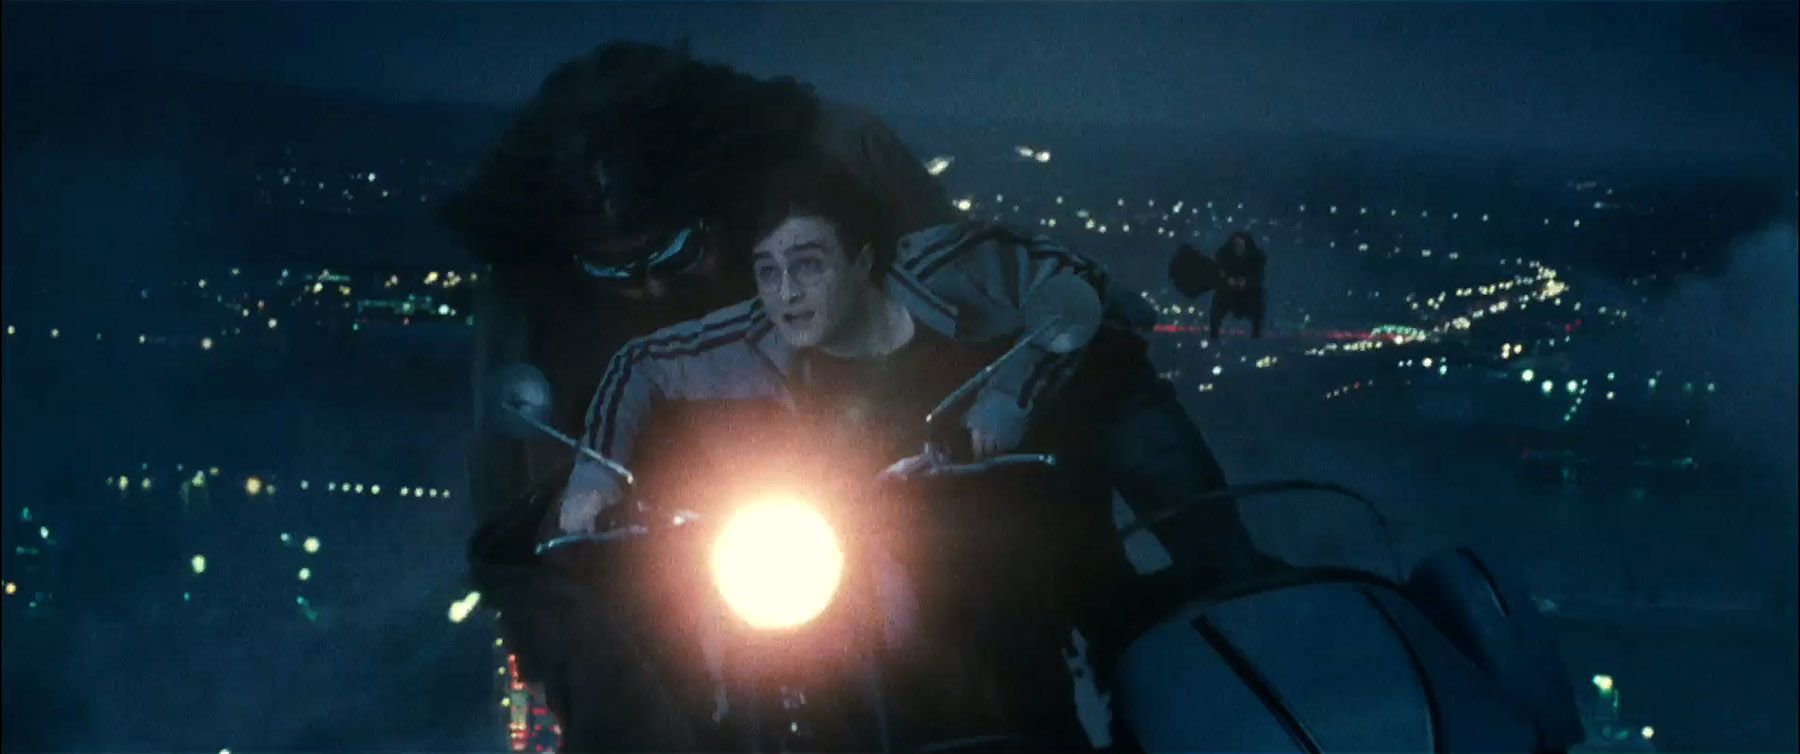 Harry (Daniel Radcliffe) rides with Hagrid (Robbie Coltrane) on his enchanted motorcycle